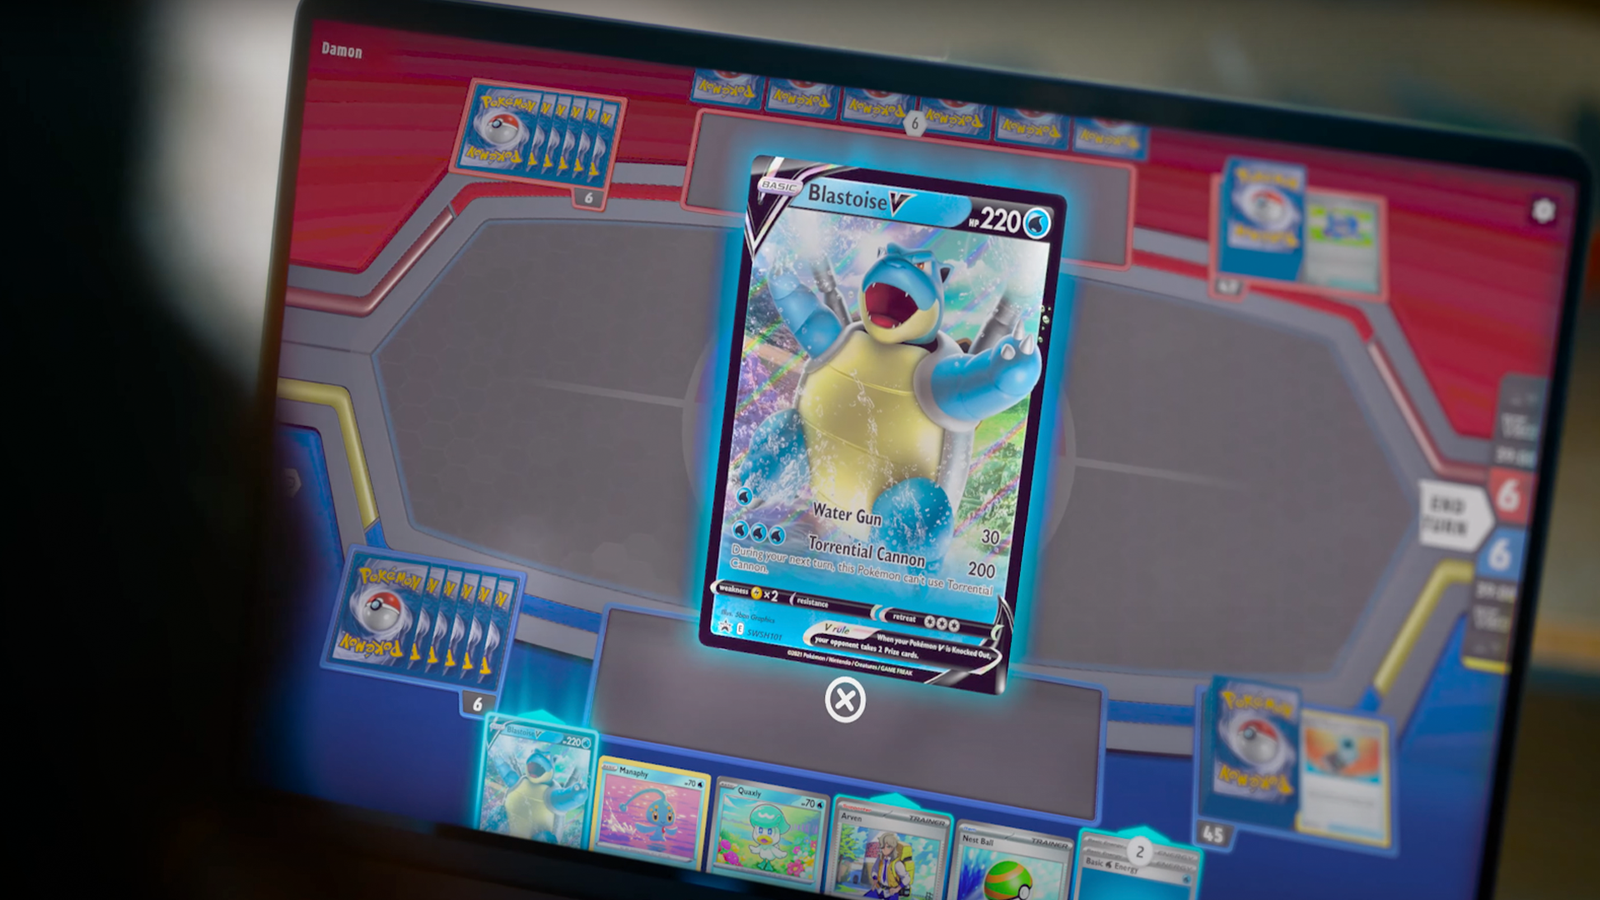 Free-to-play Pokémon TCG Live will fully launch on PC this June